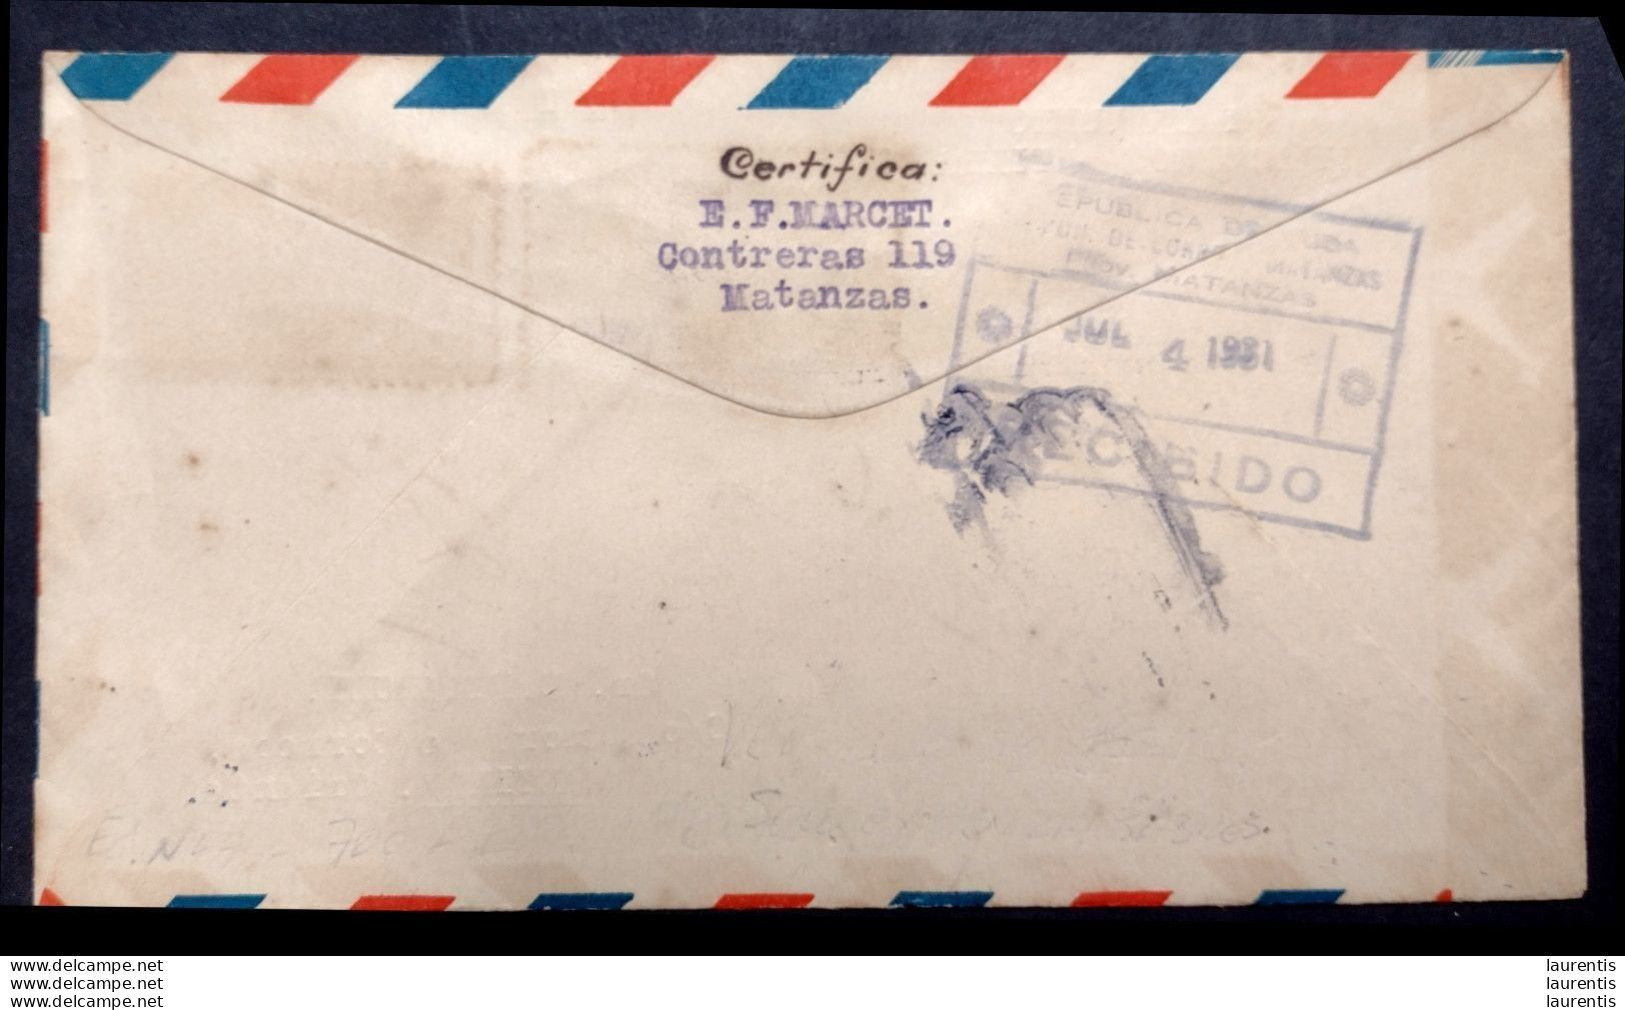 D575. First Flight Cienfuegos-Antilla - Registered On July 1st, 1931 - Only 14 Covers Are Known - 215,00 - Luftpost